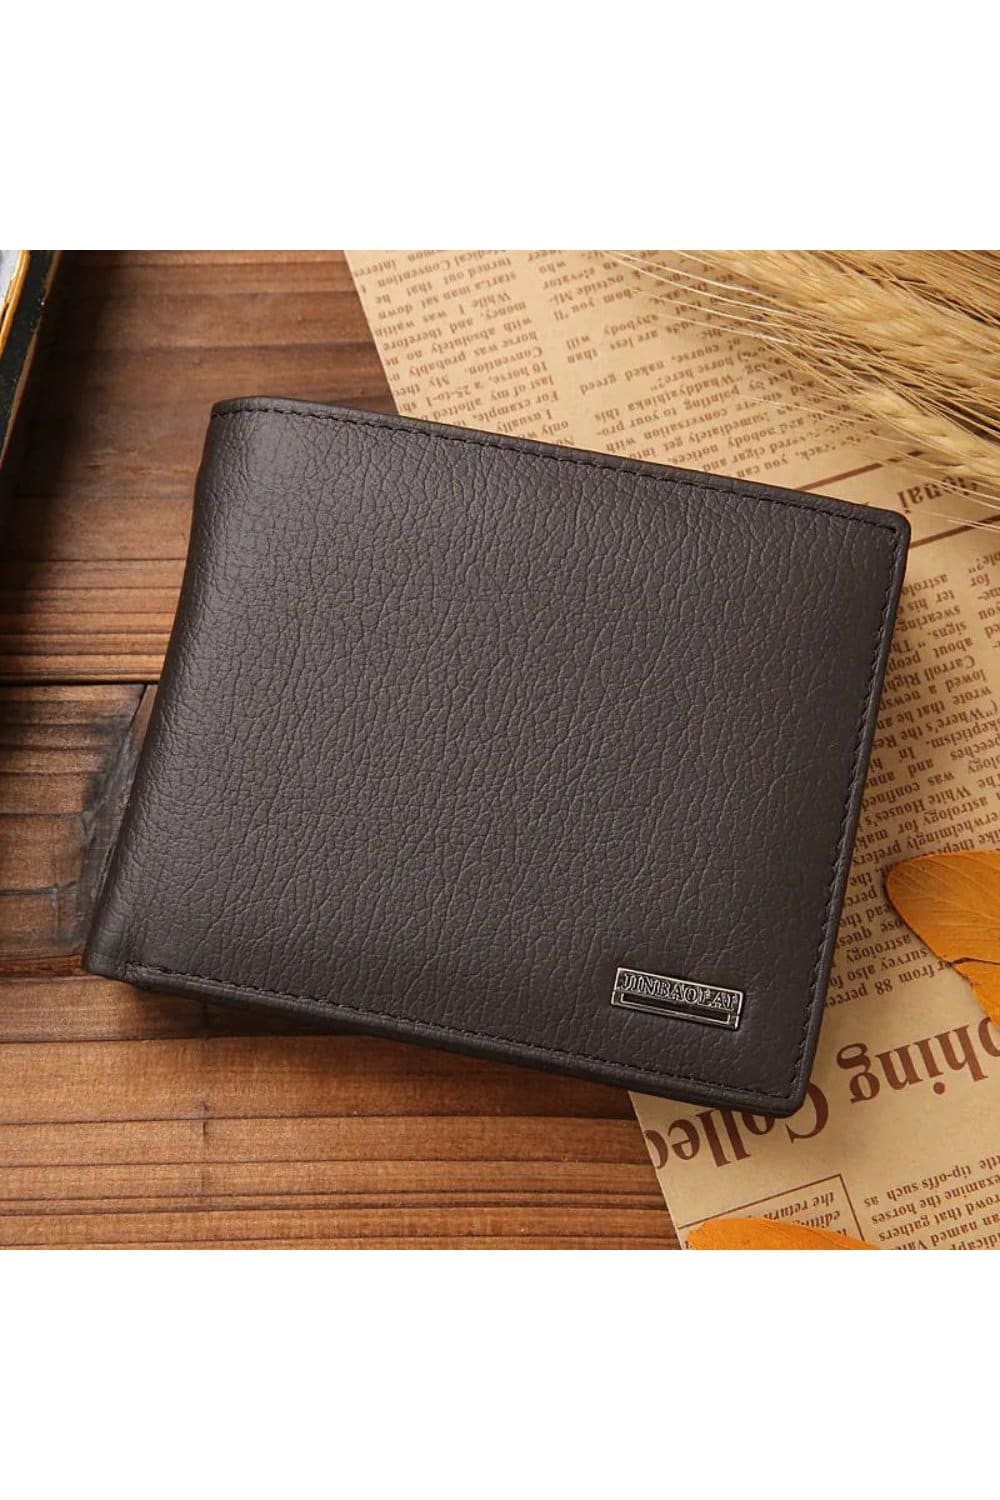 Stylish and Functional Men's Leather Wallet Fatio General Trading